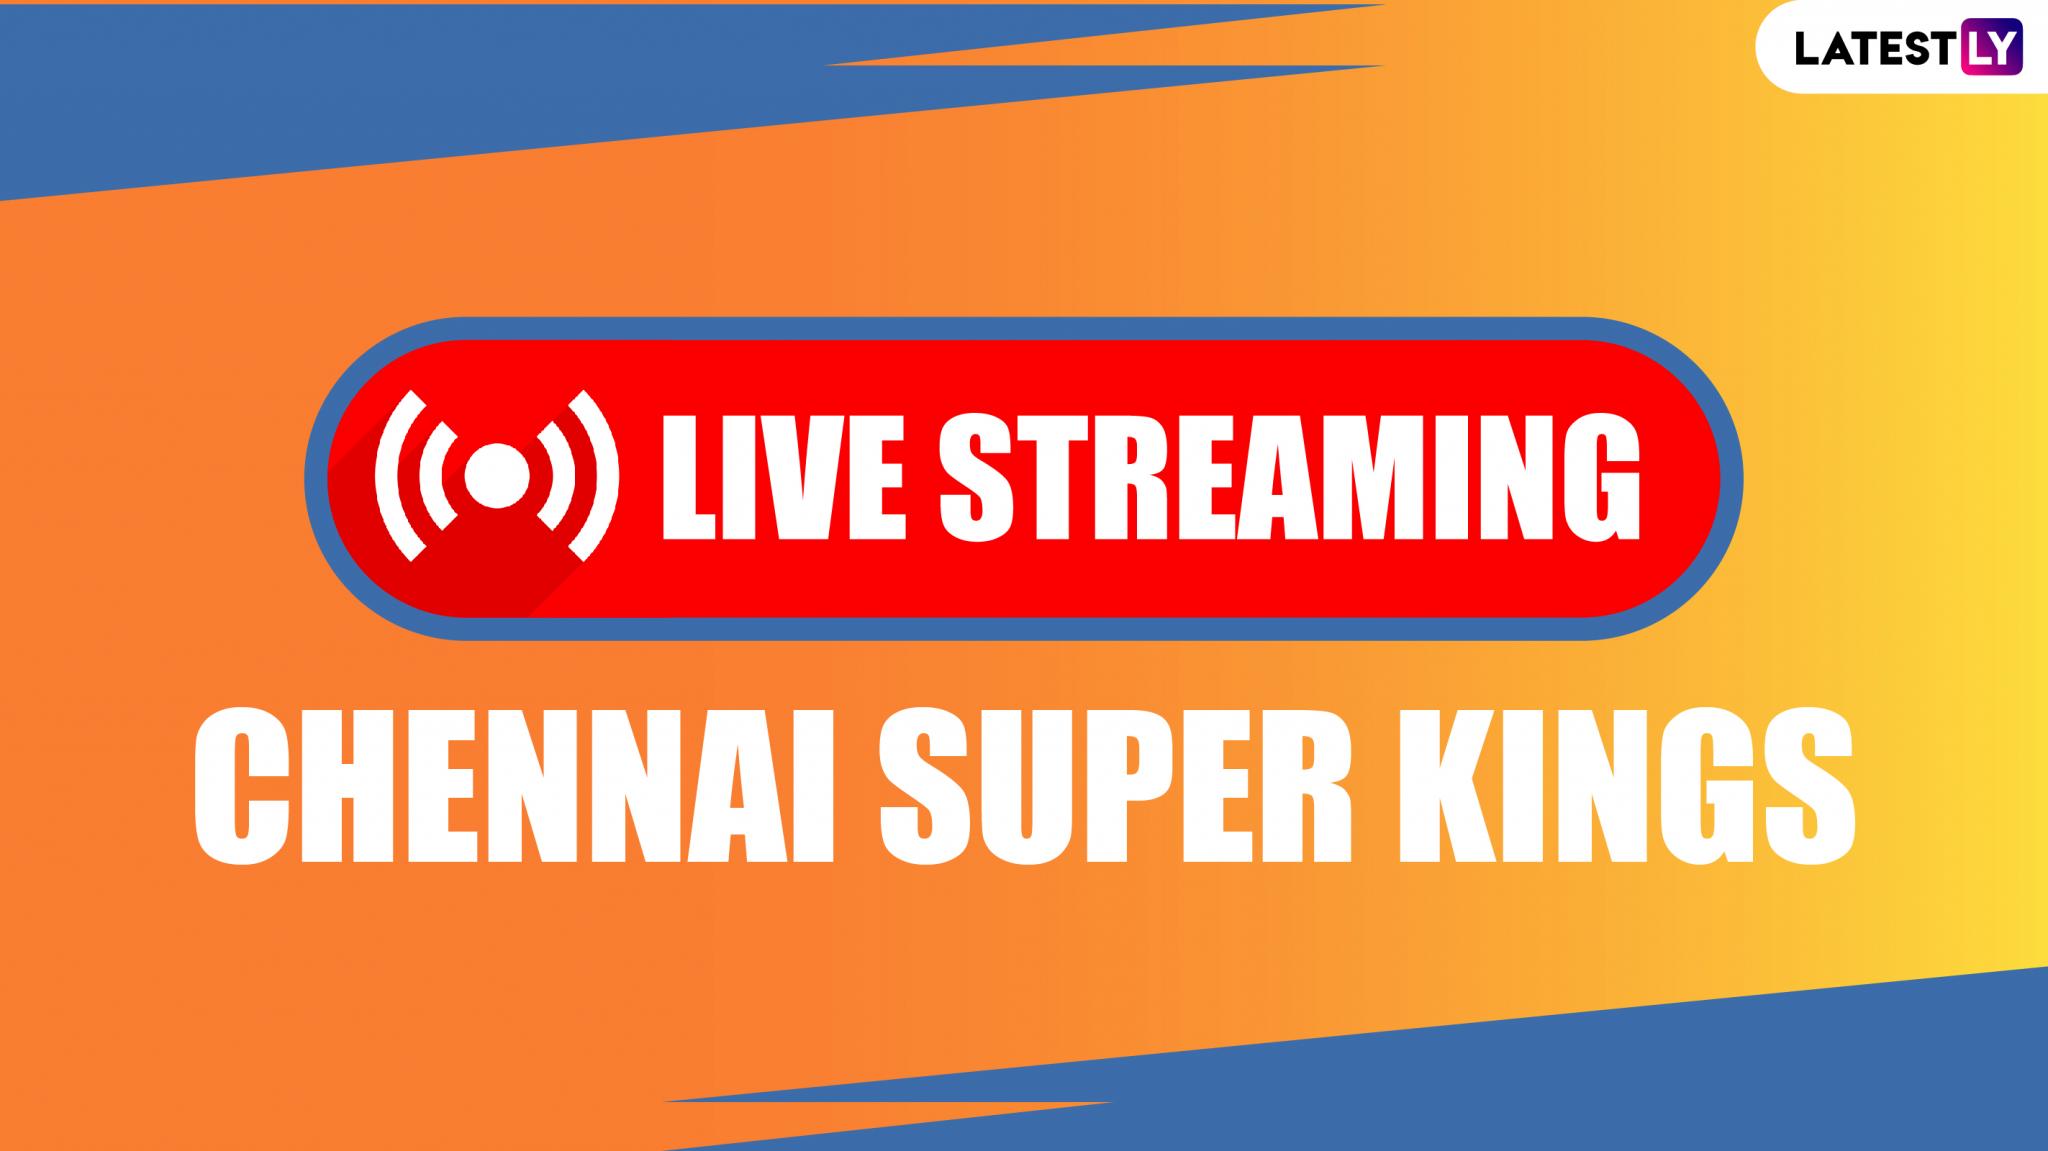 Cricket News IPL 2020 Live Telecast of CSK Matches on Star Sports 1 Tamil Channel 🏏 LatestLY